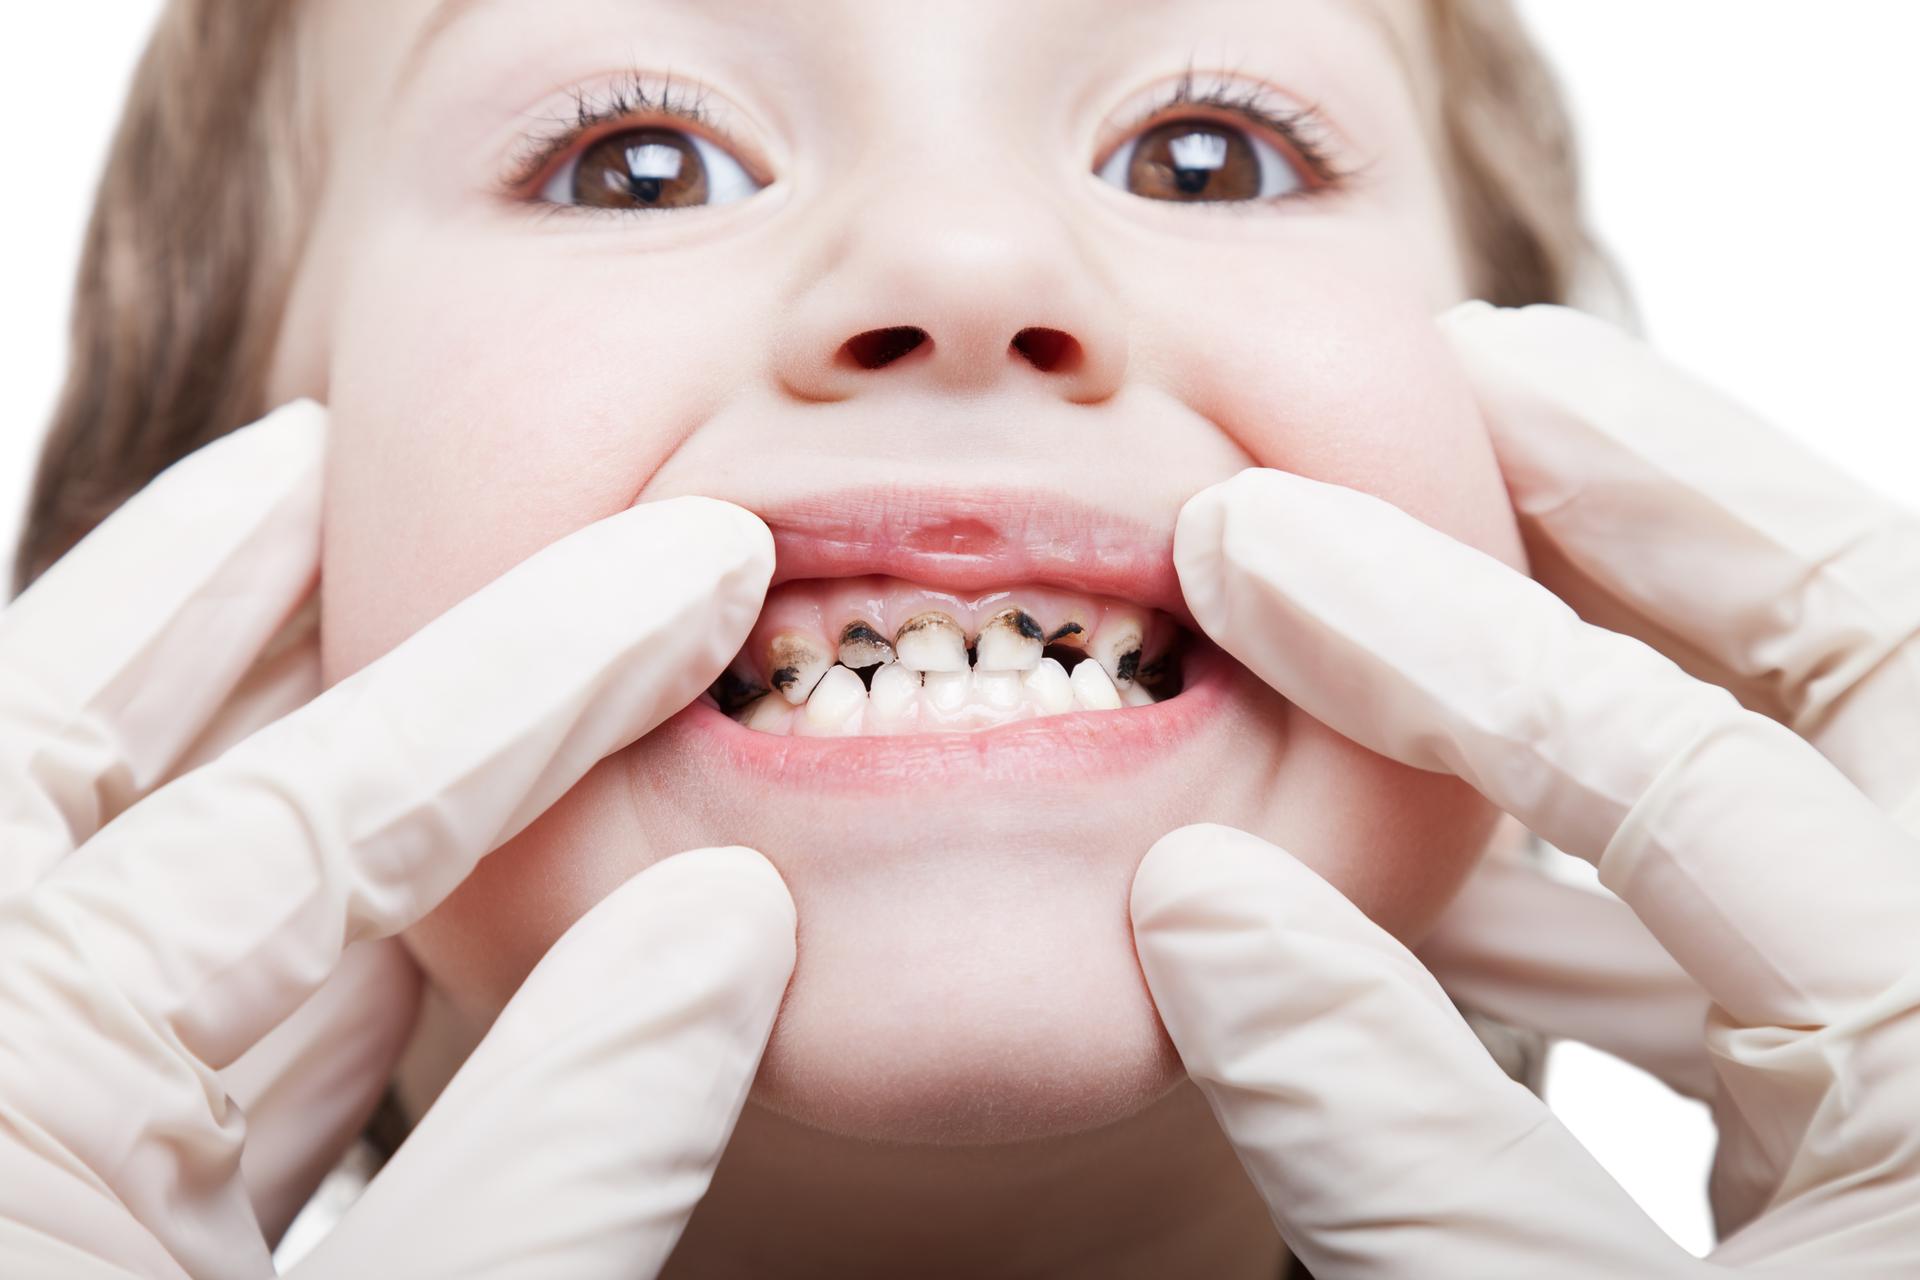 This is the image for the news article titled Causes and Remedies for Teeth Discoloration in Children